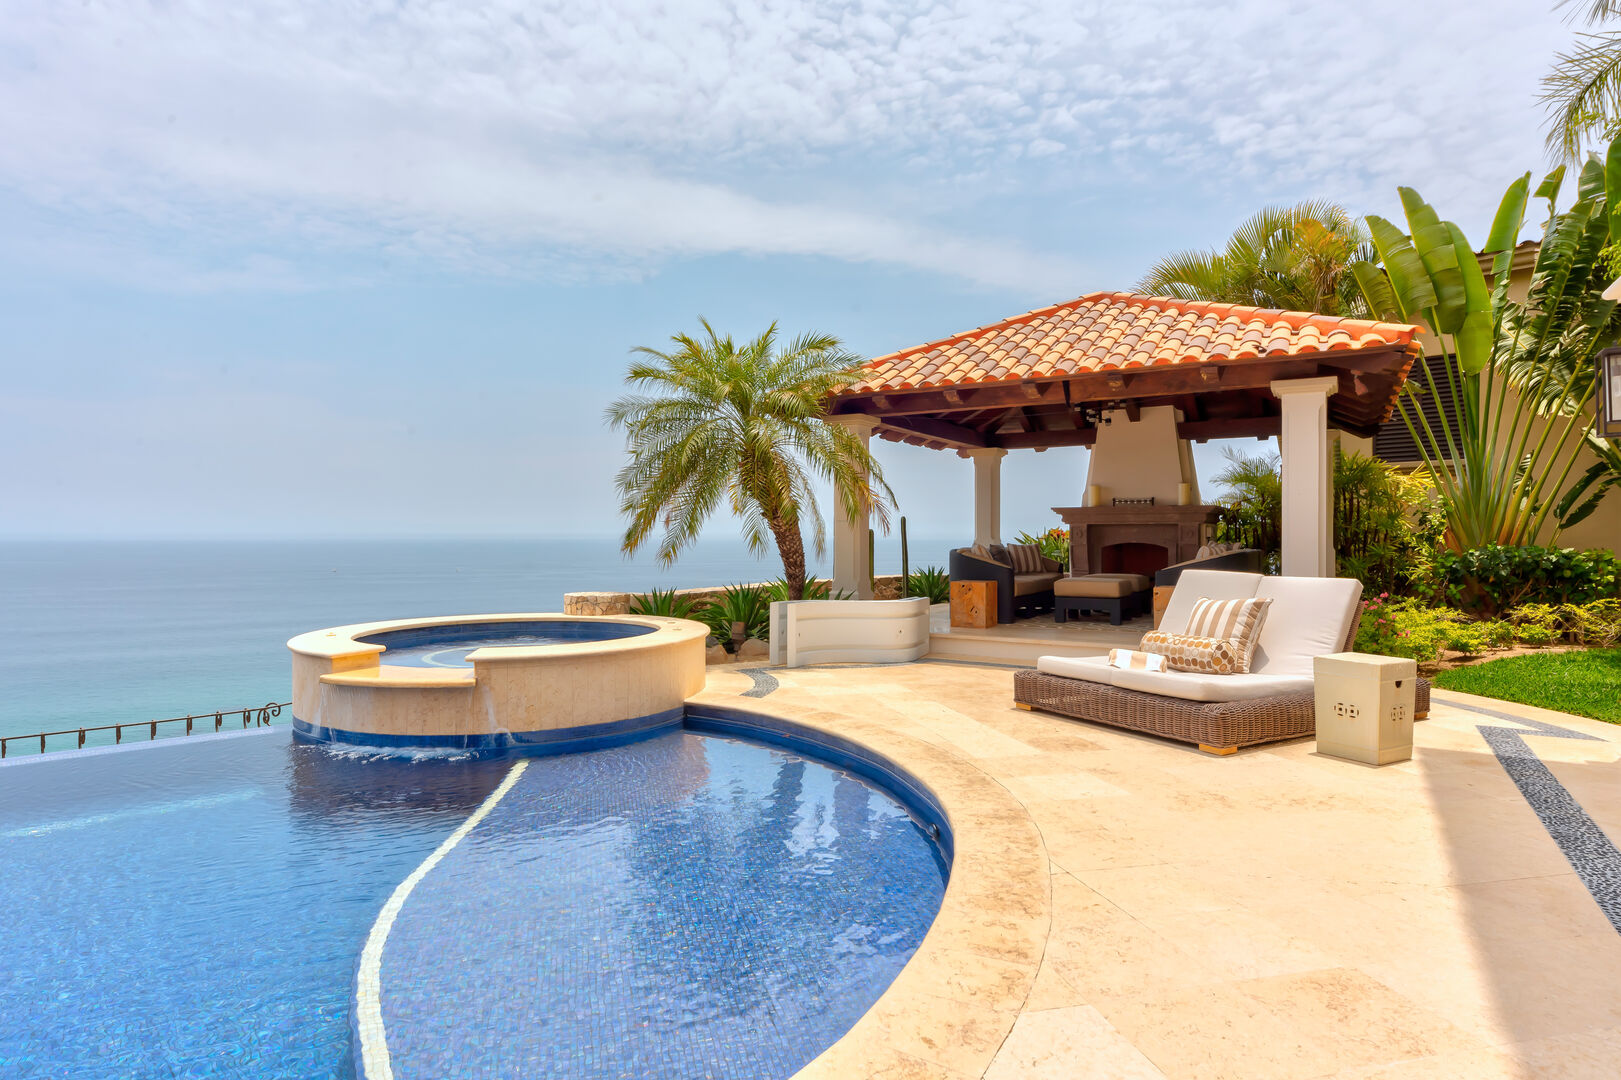 The infinity pool with a hot tub at Hacienda 502